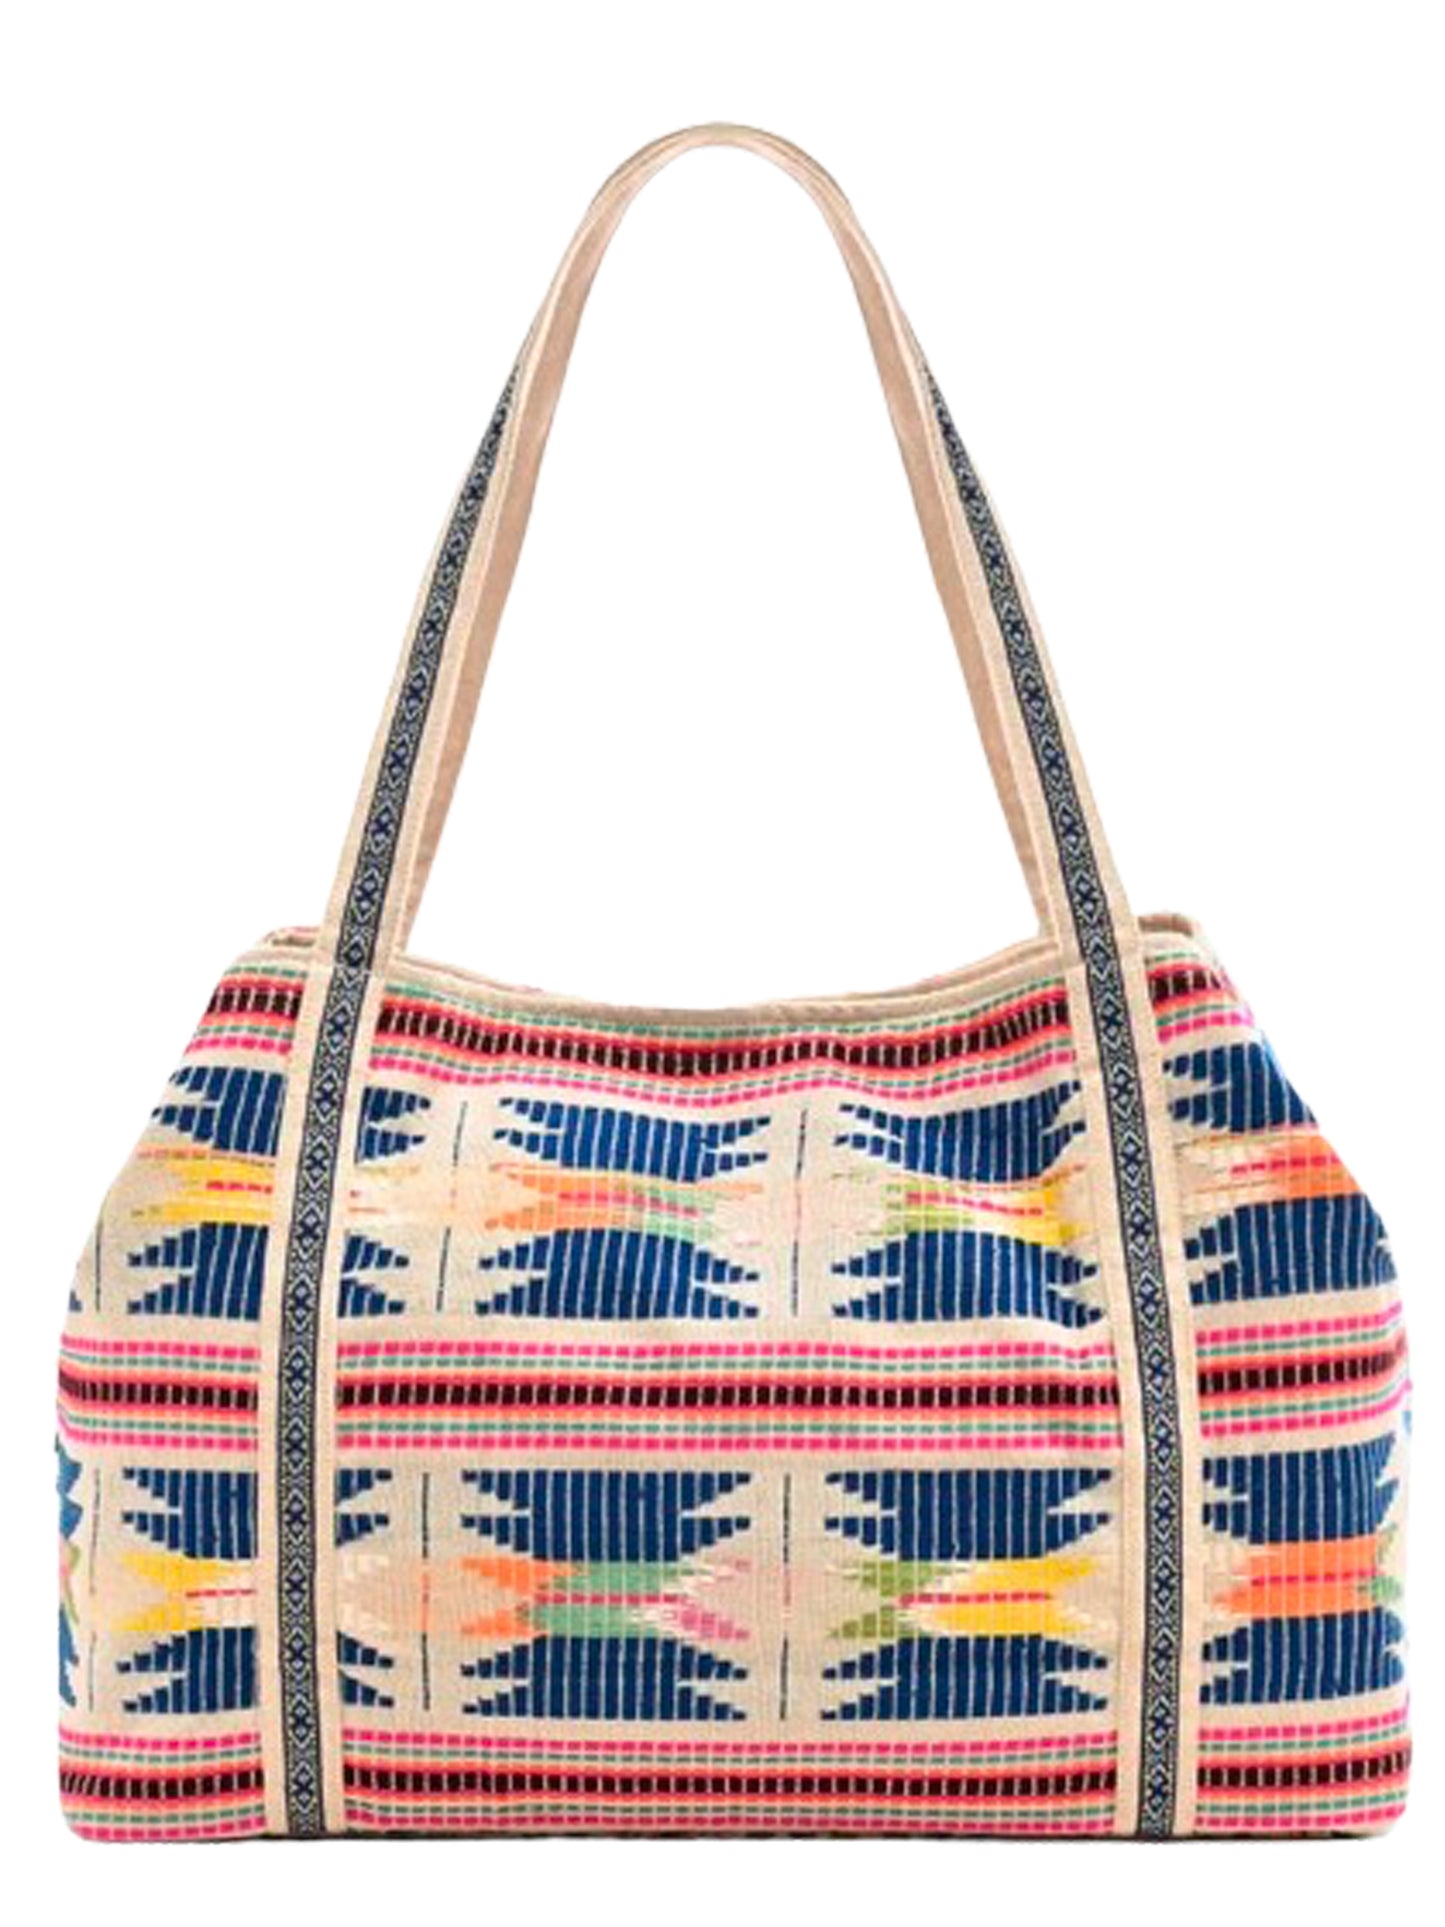 confetti aztec embellished tote